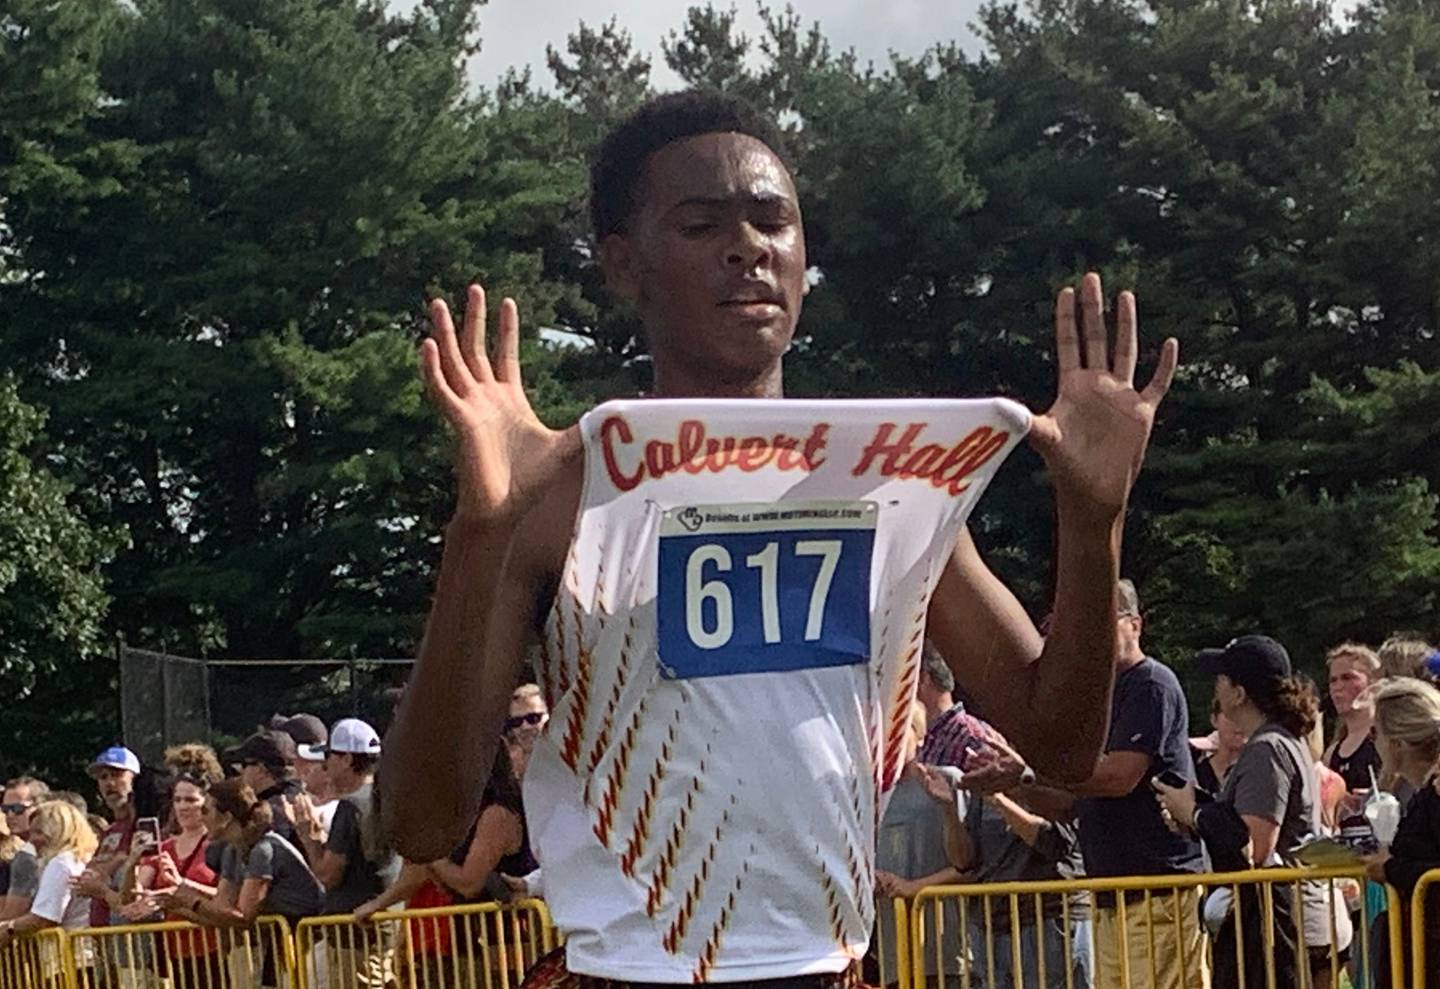 Reigning MIAA cross country champion Cameron Davis is back for his junior year and poised to do great things. He opened his season with the individual title in the boys race at the Barnhardt Invitational, leading his Cardinals teammates to the team title as well.